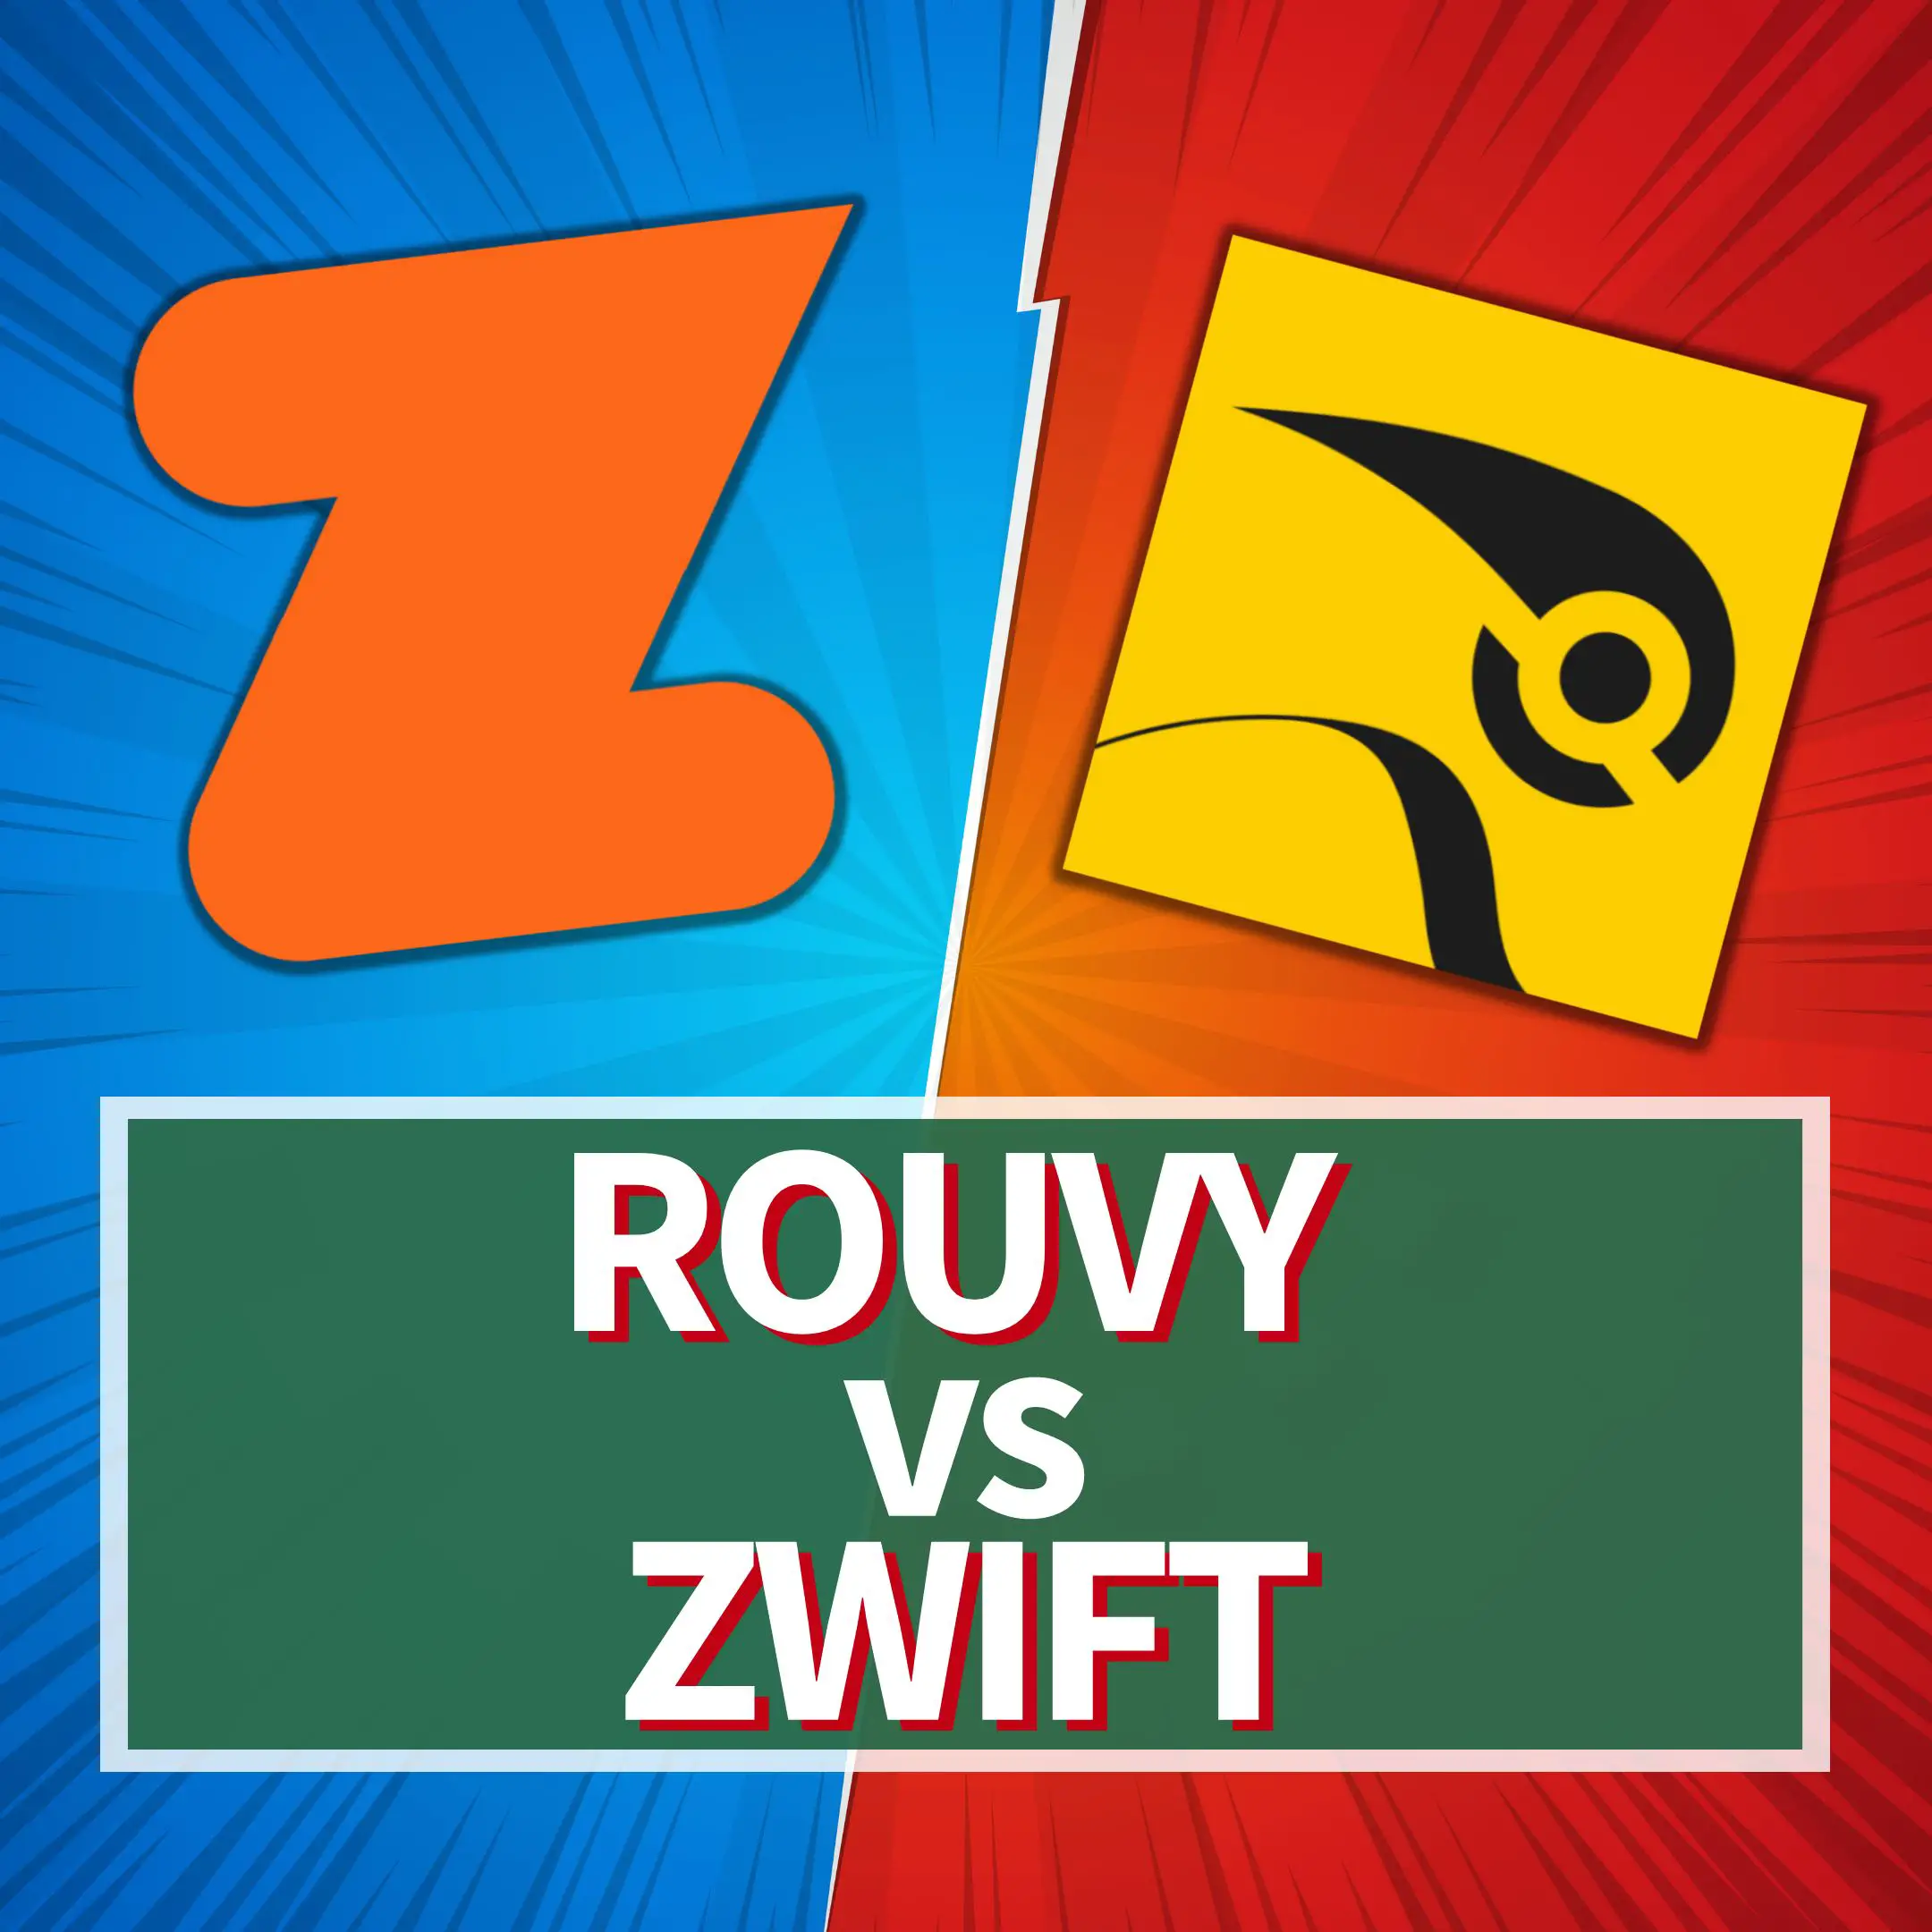 rouvy vs zwift featured image